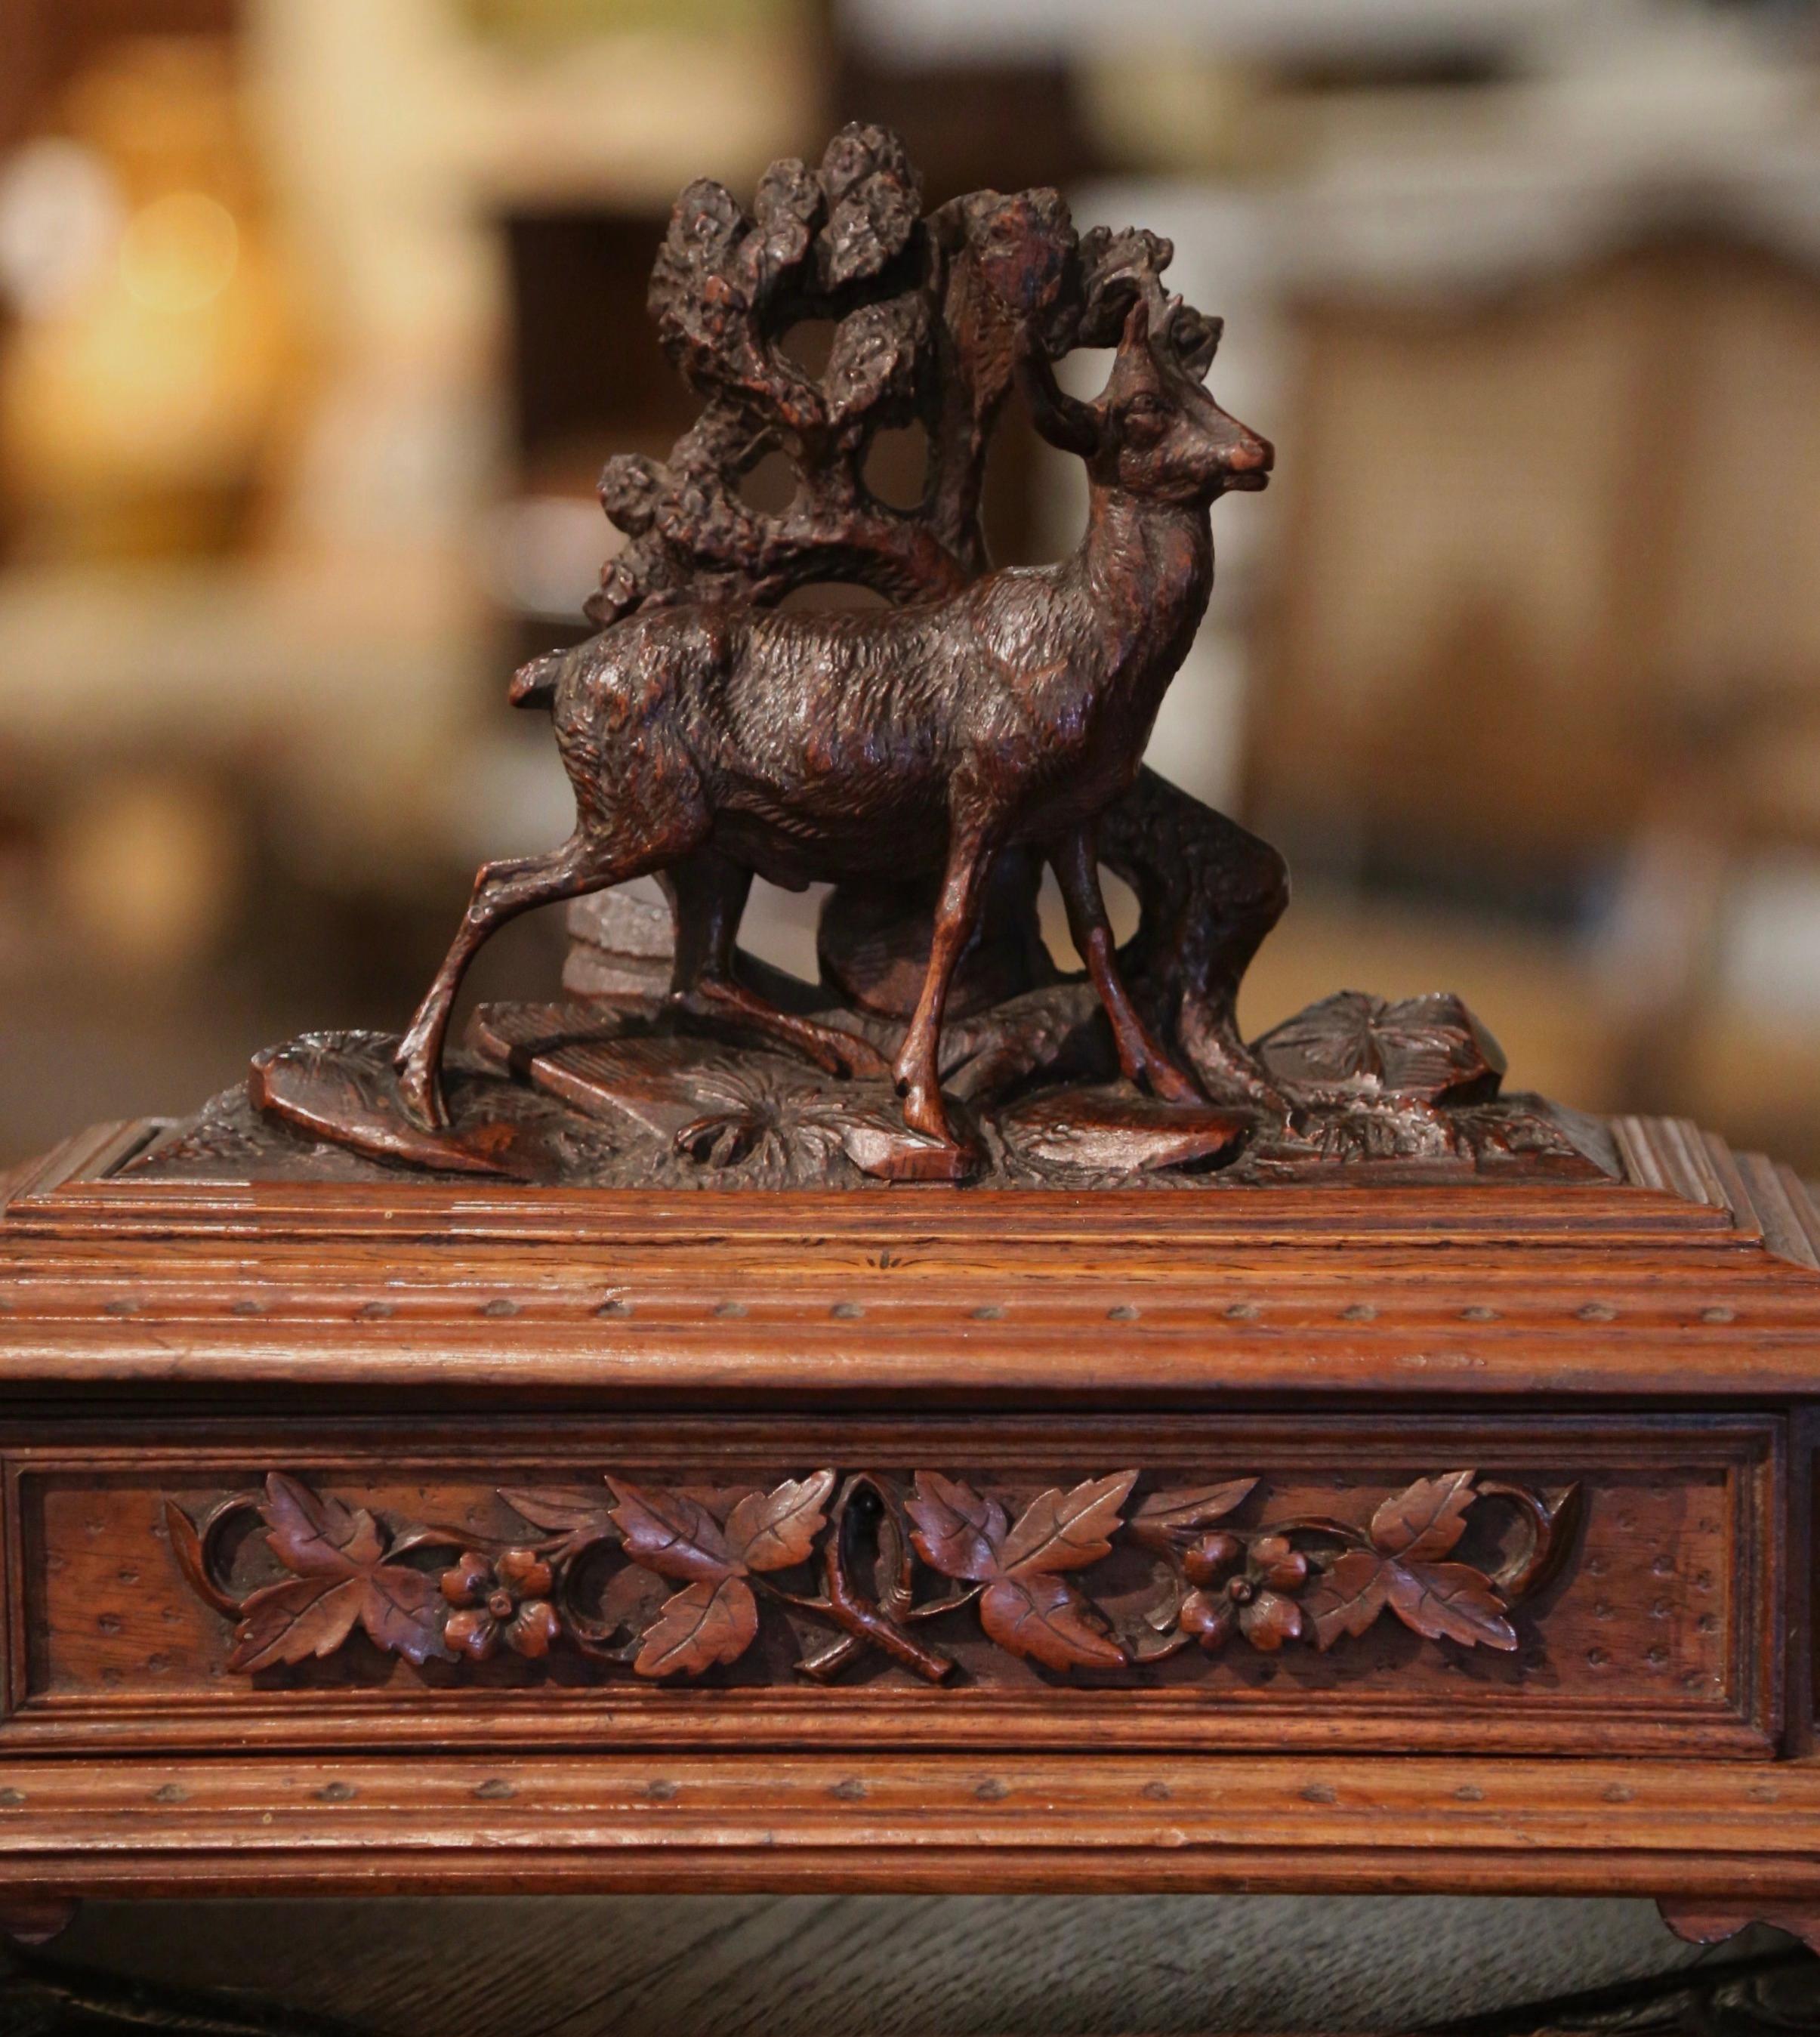 19th Century French Black Forest Carved Walnut Jewelry Box with Deer Motifs 1